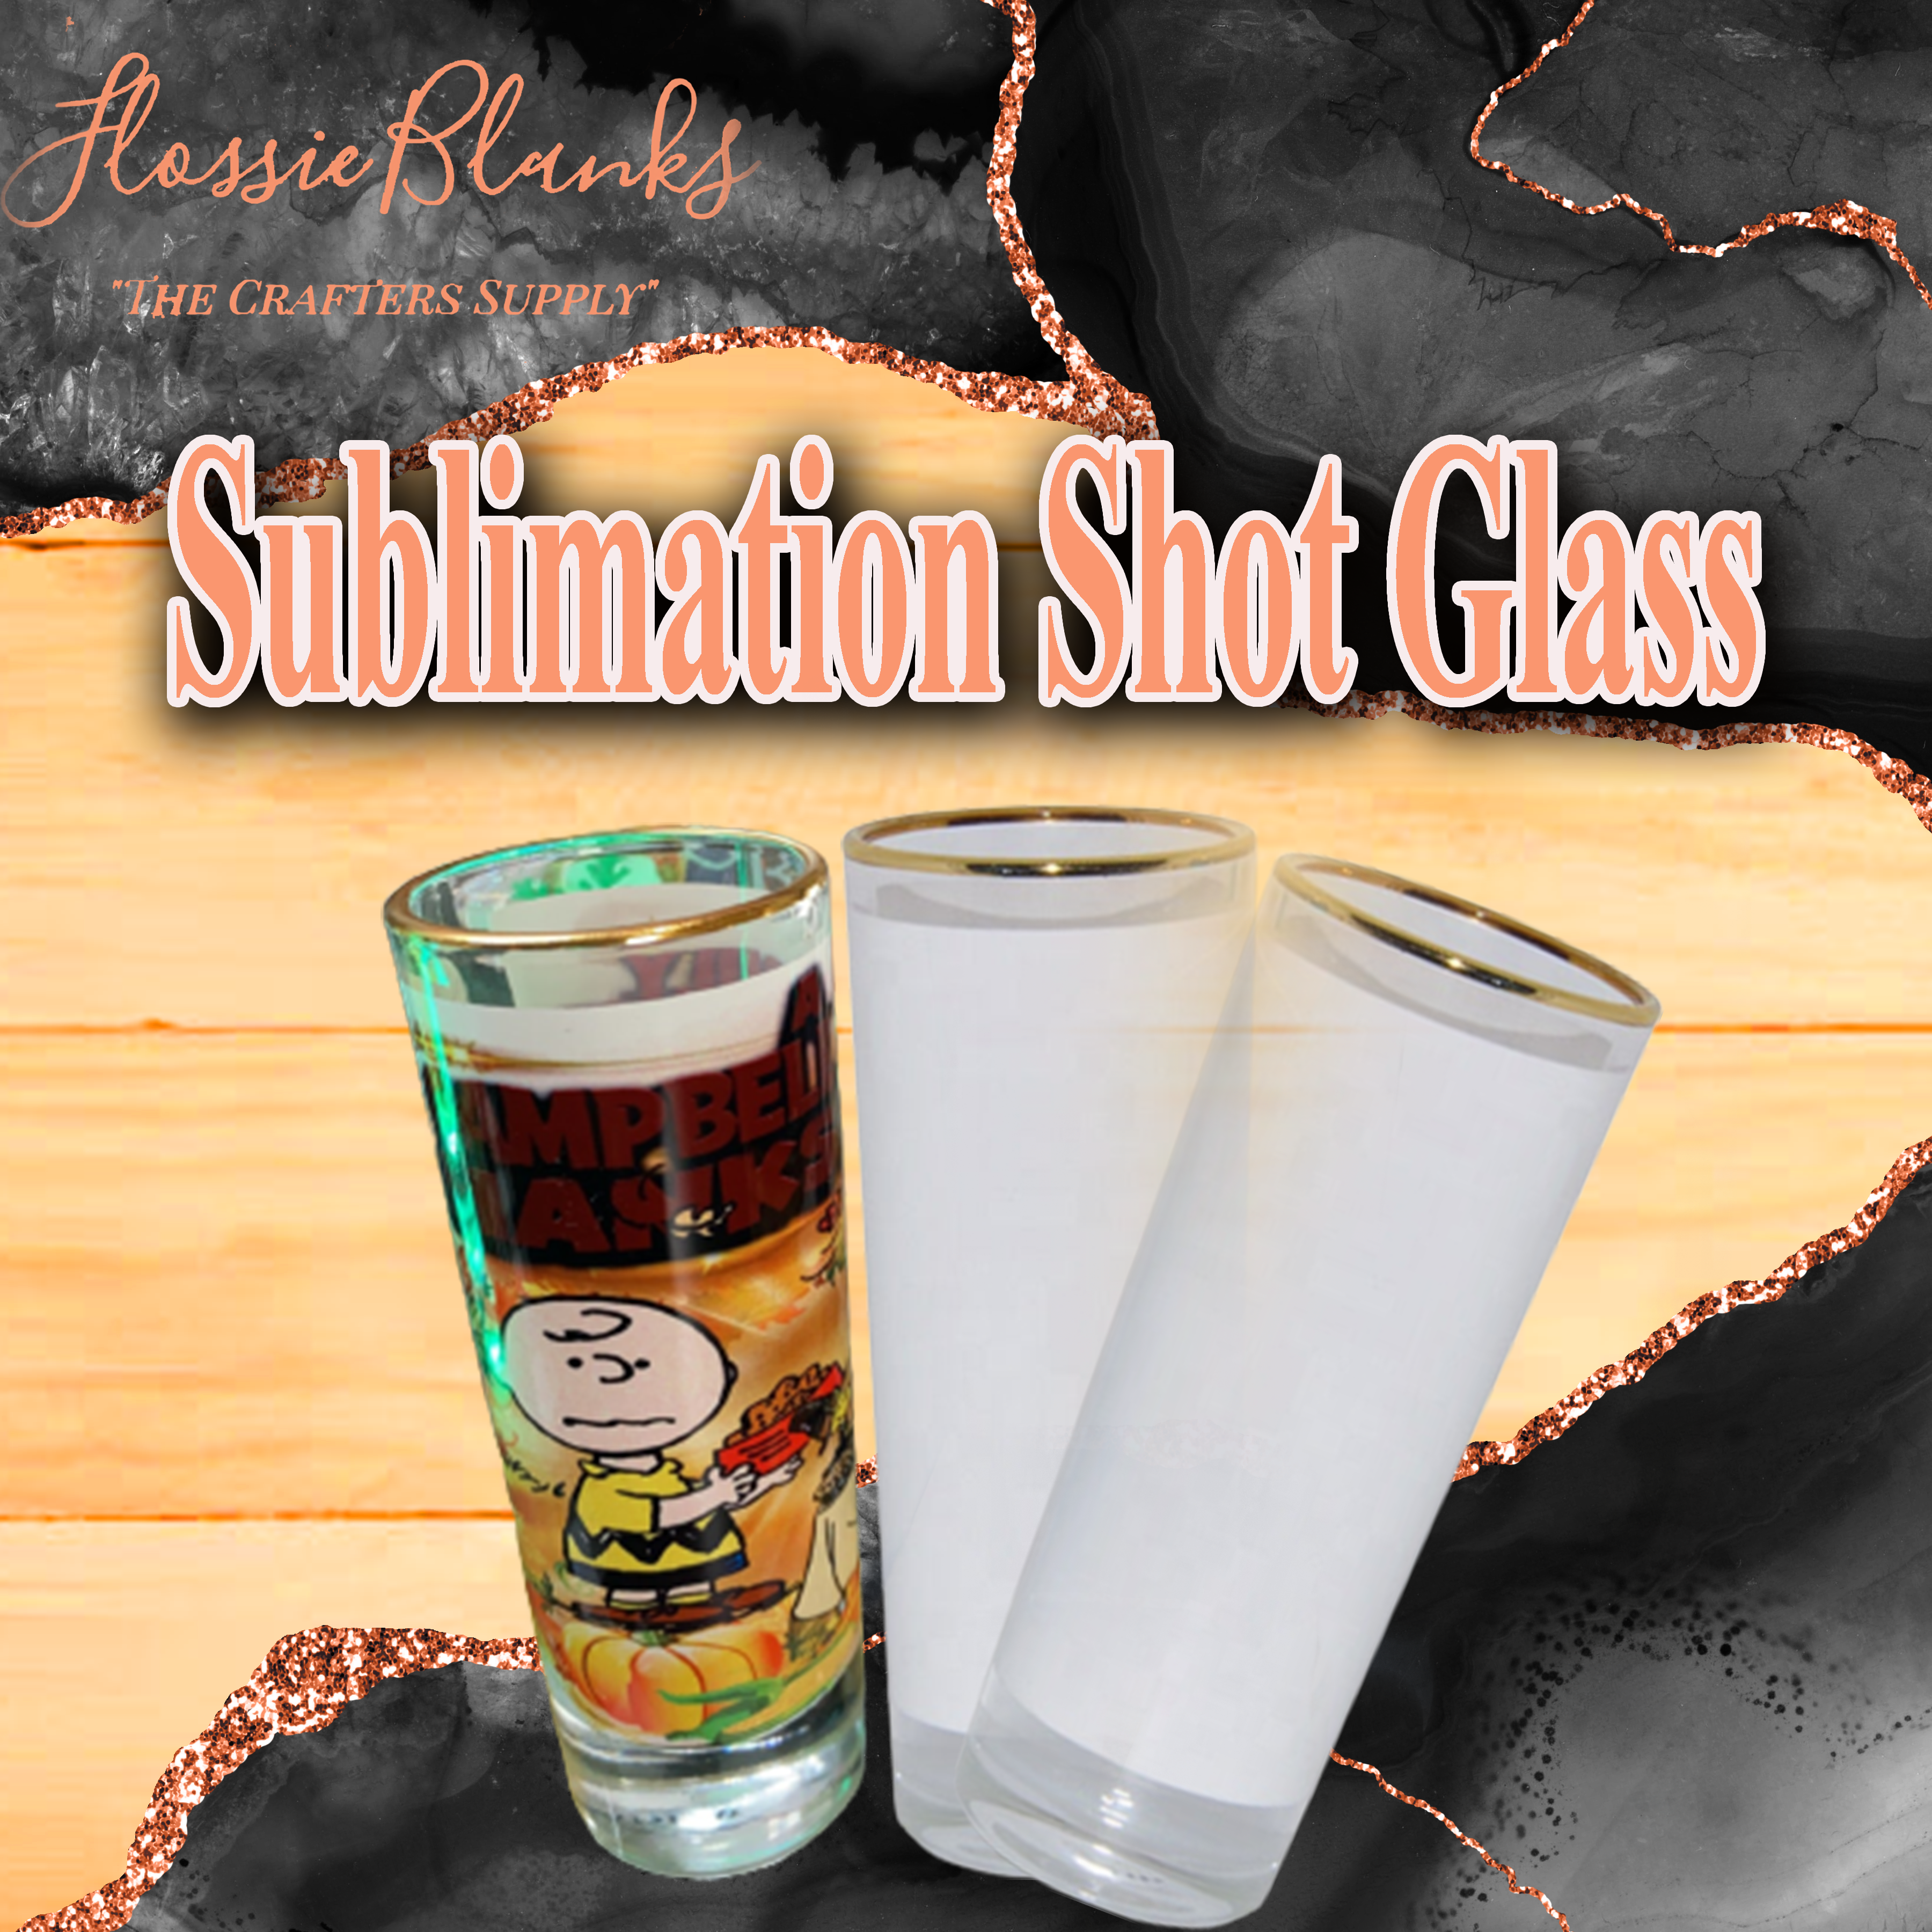 3oz Stainless Steel Sublimation Glow in the Dark Shot Glass – Blanktastic  Sublimation Blanks